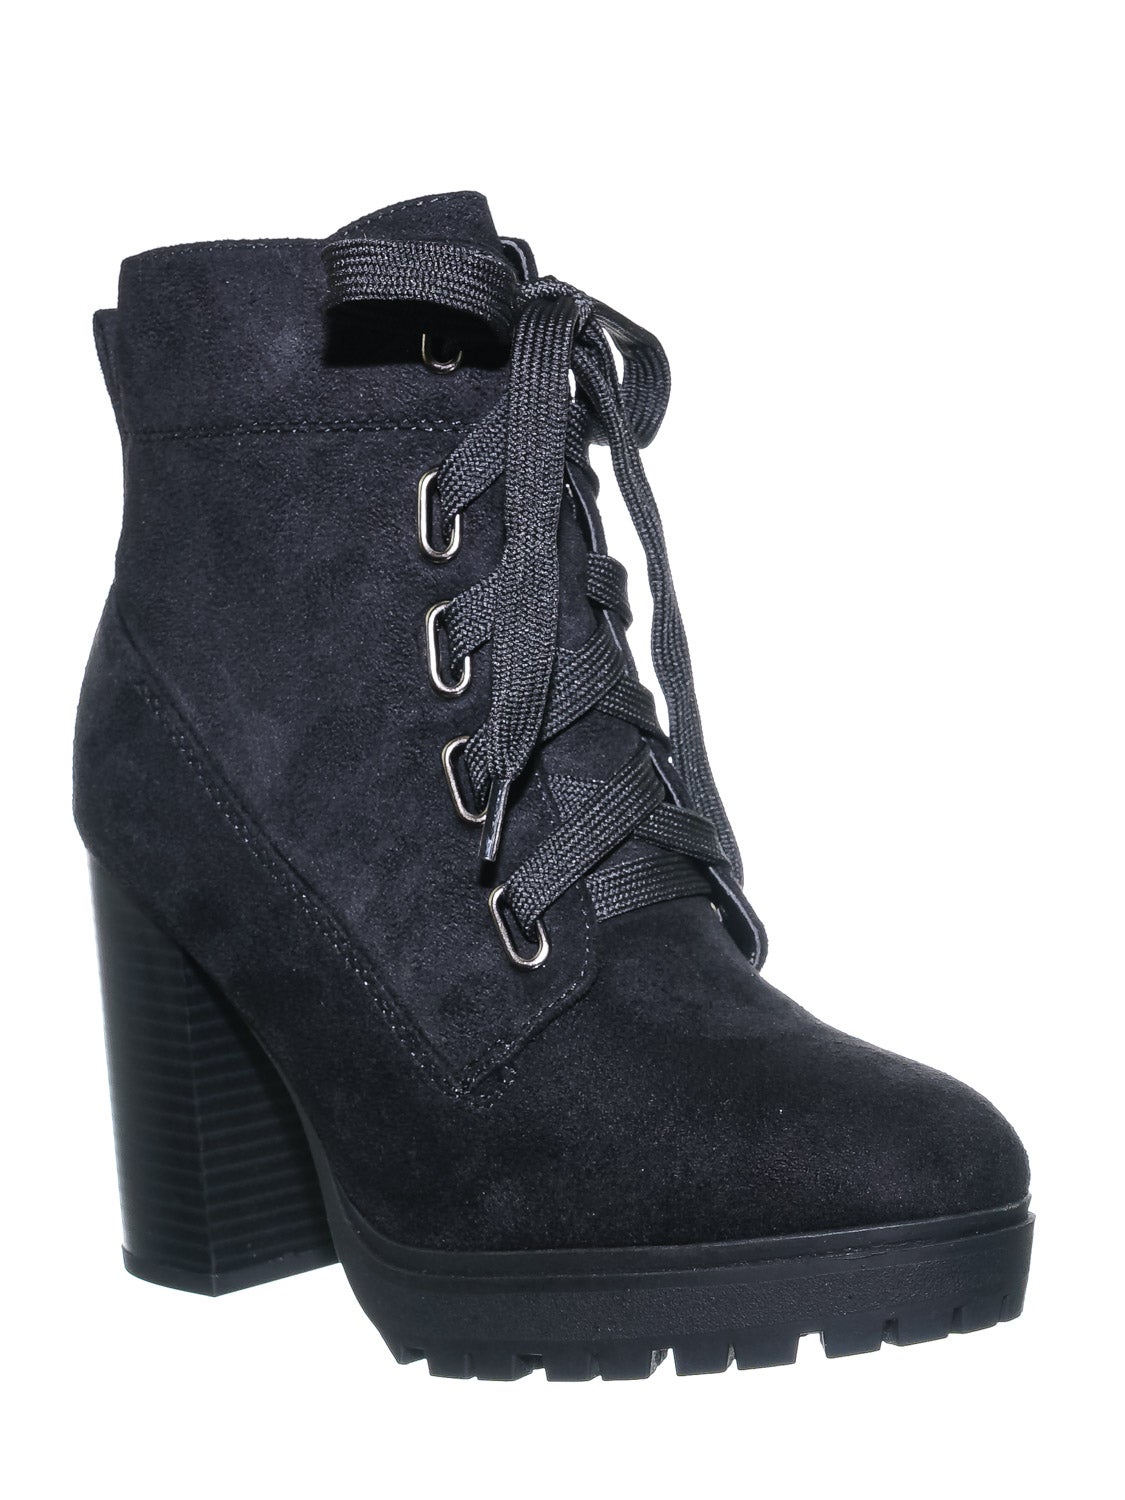 Step Into The Season With These Statement Boots Under $100